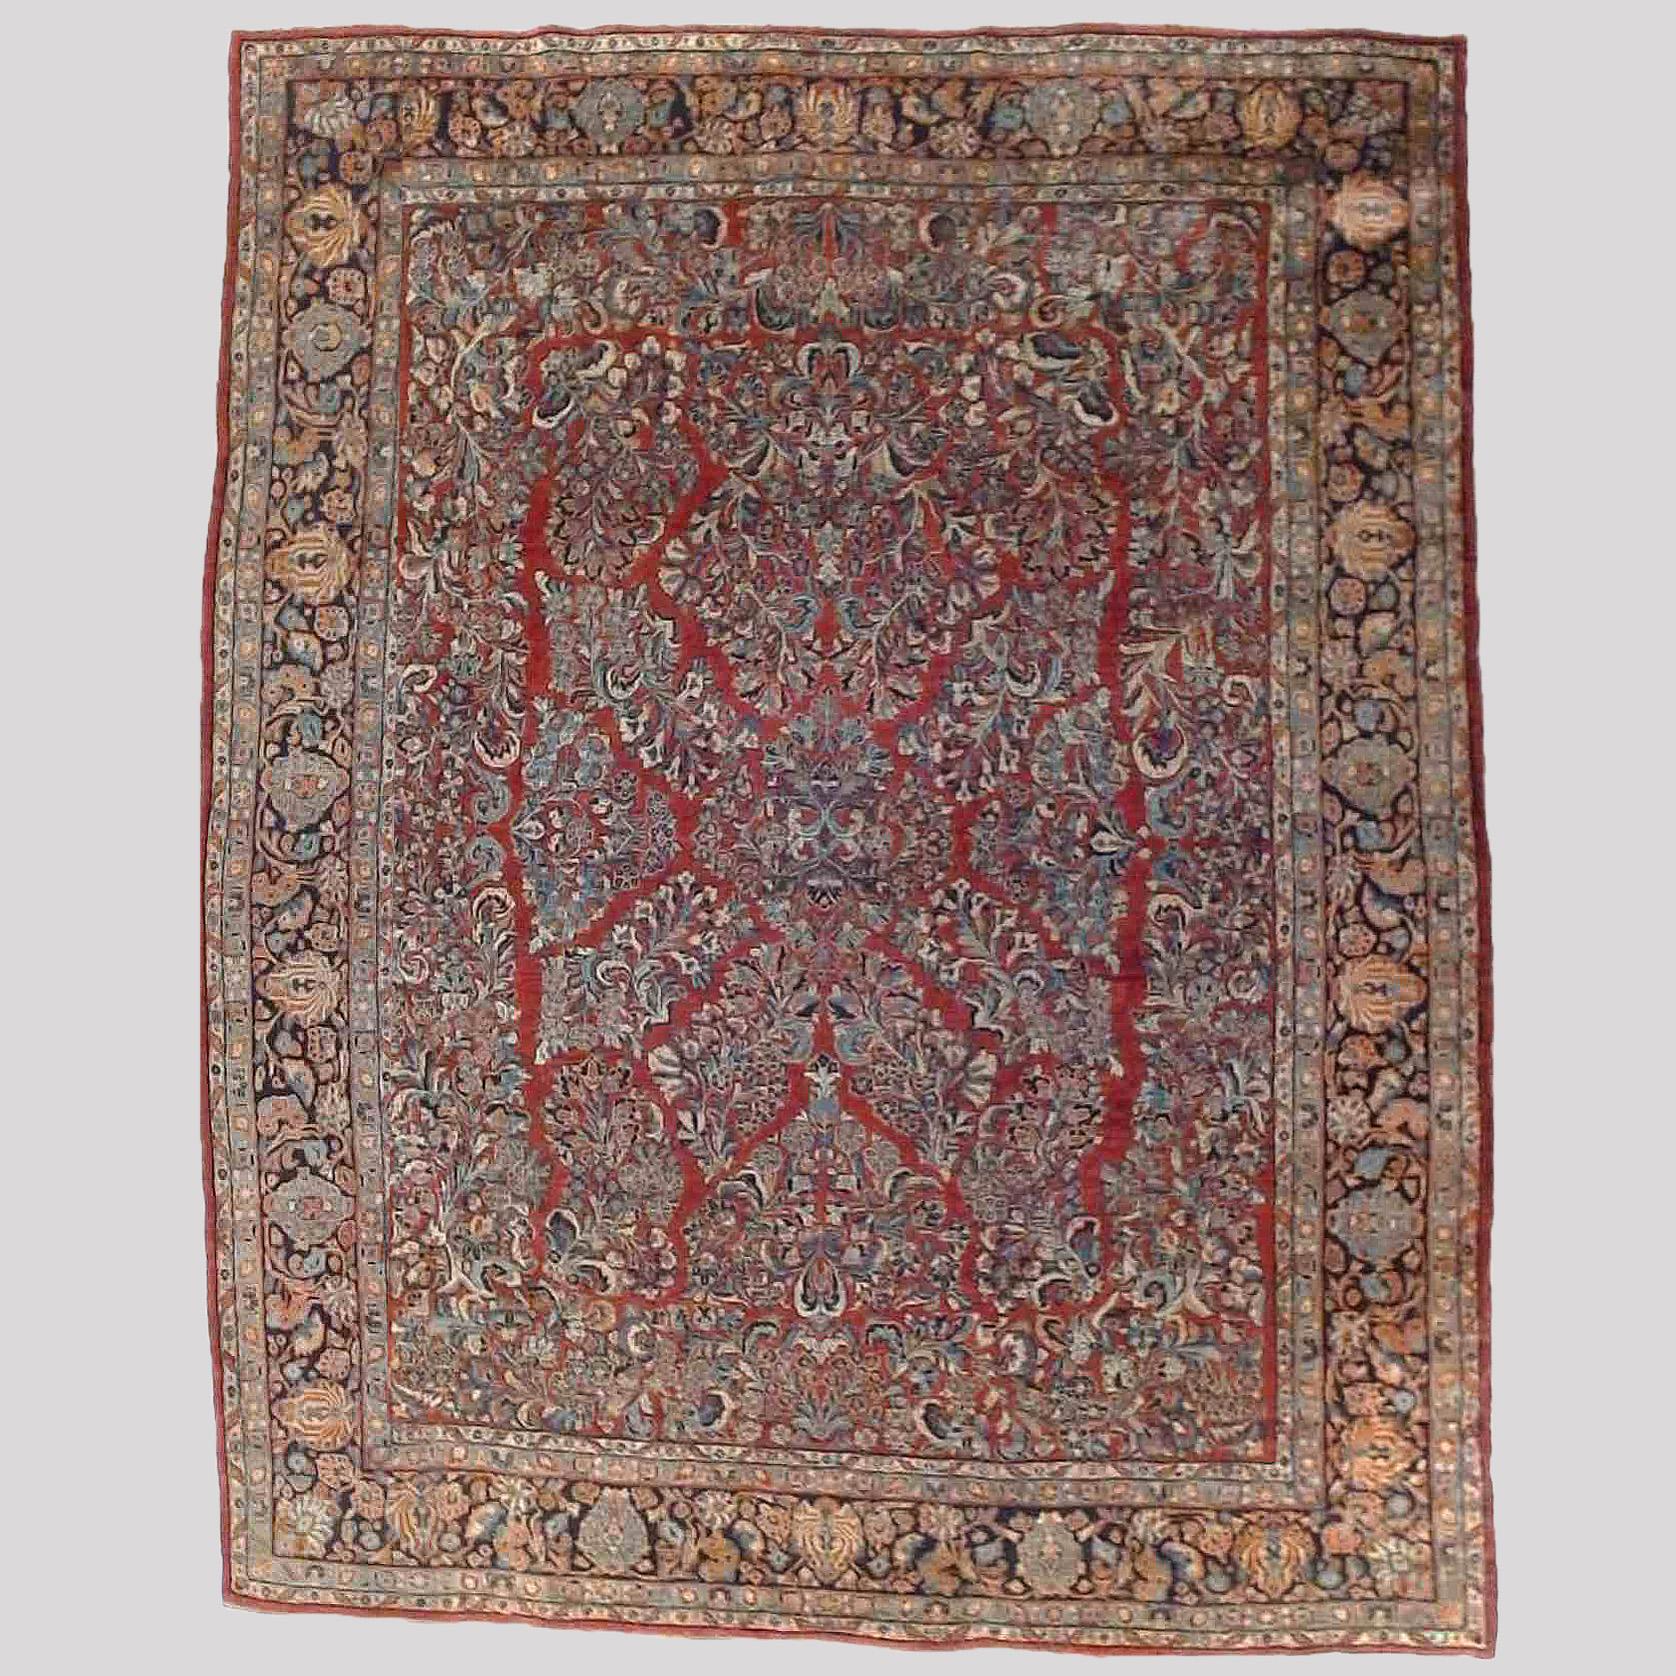 An antique Sarouk oriental rug offers wool construction with allover floral and foliate design on red ground, c1930

Measures- 134''L x 107.5''W 